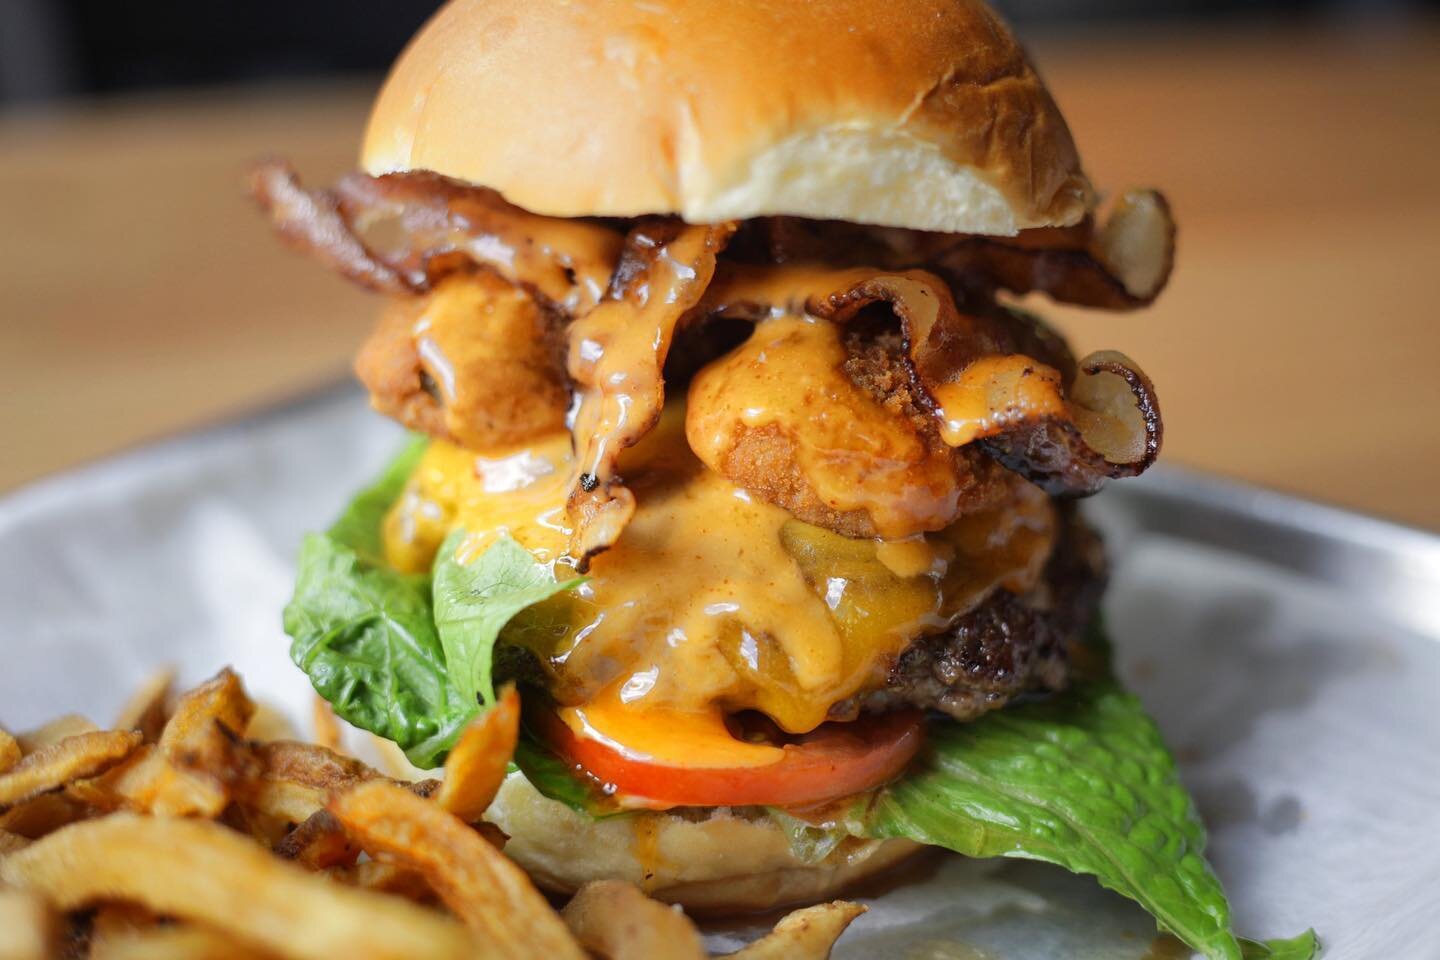 🍔BURGER OF THE MONTH 🍔
The Bang Bang Burger! 
Our 6 oz smash burger, cheddar cheese, bacon, jalape&ntilde;o poppers, lettuce, tomato, topped with our homemade Bang Bang sauce! 

&bull;
&bull;
&bull;
#burger #eats #njeats #foodie #food #instagood #l